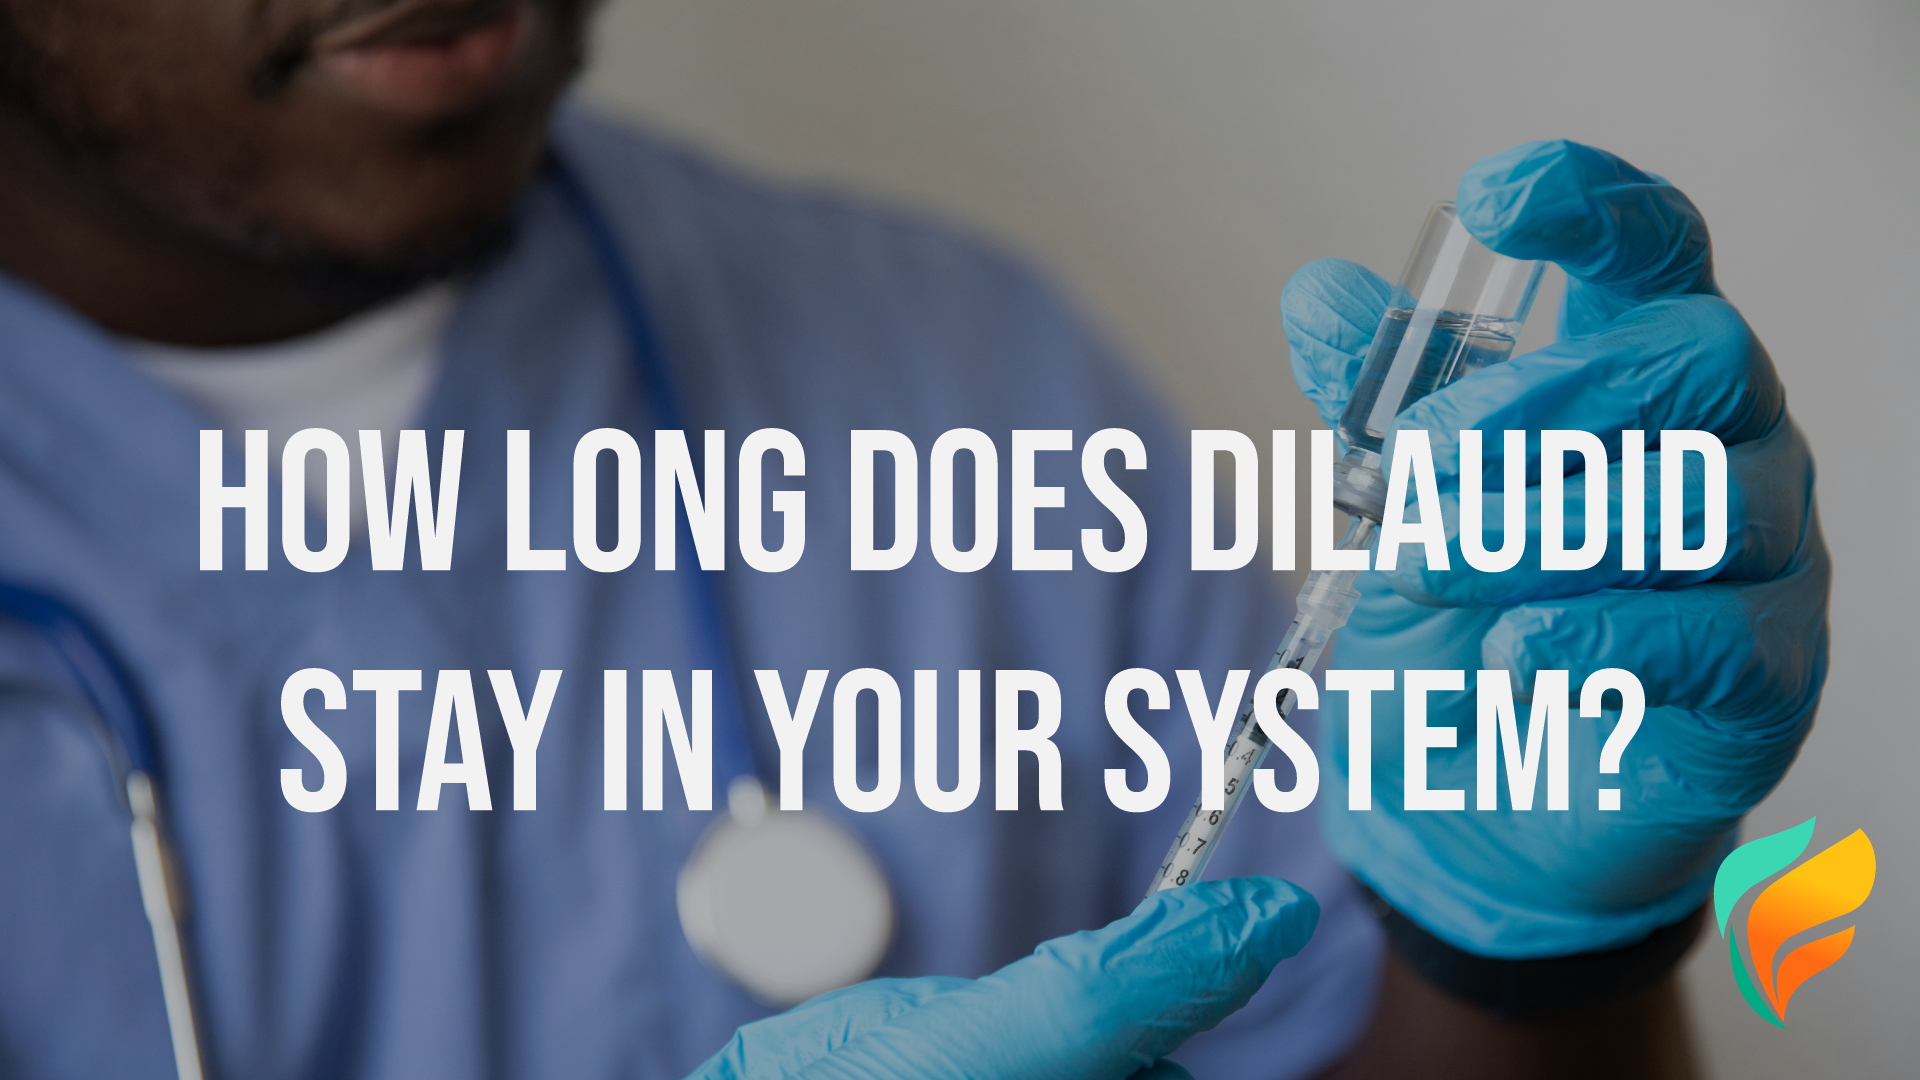 How Long Does Dilaudid Stay In Your System?